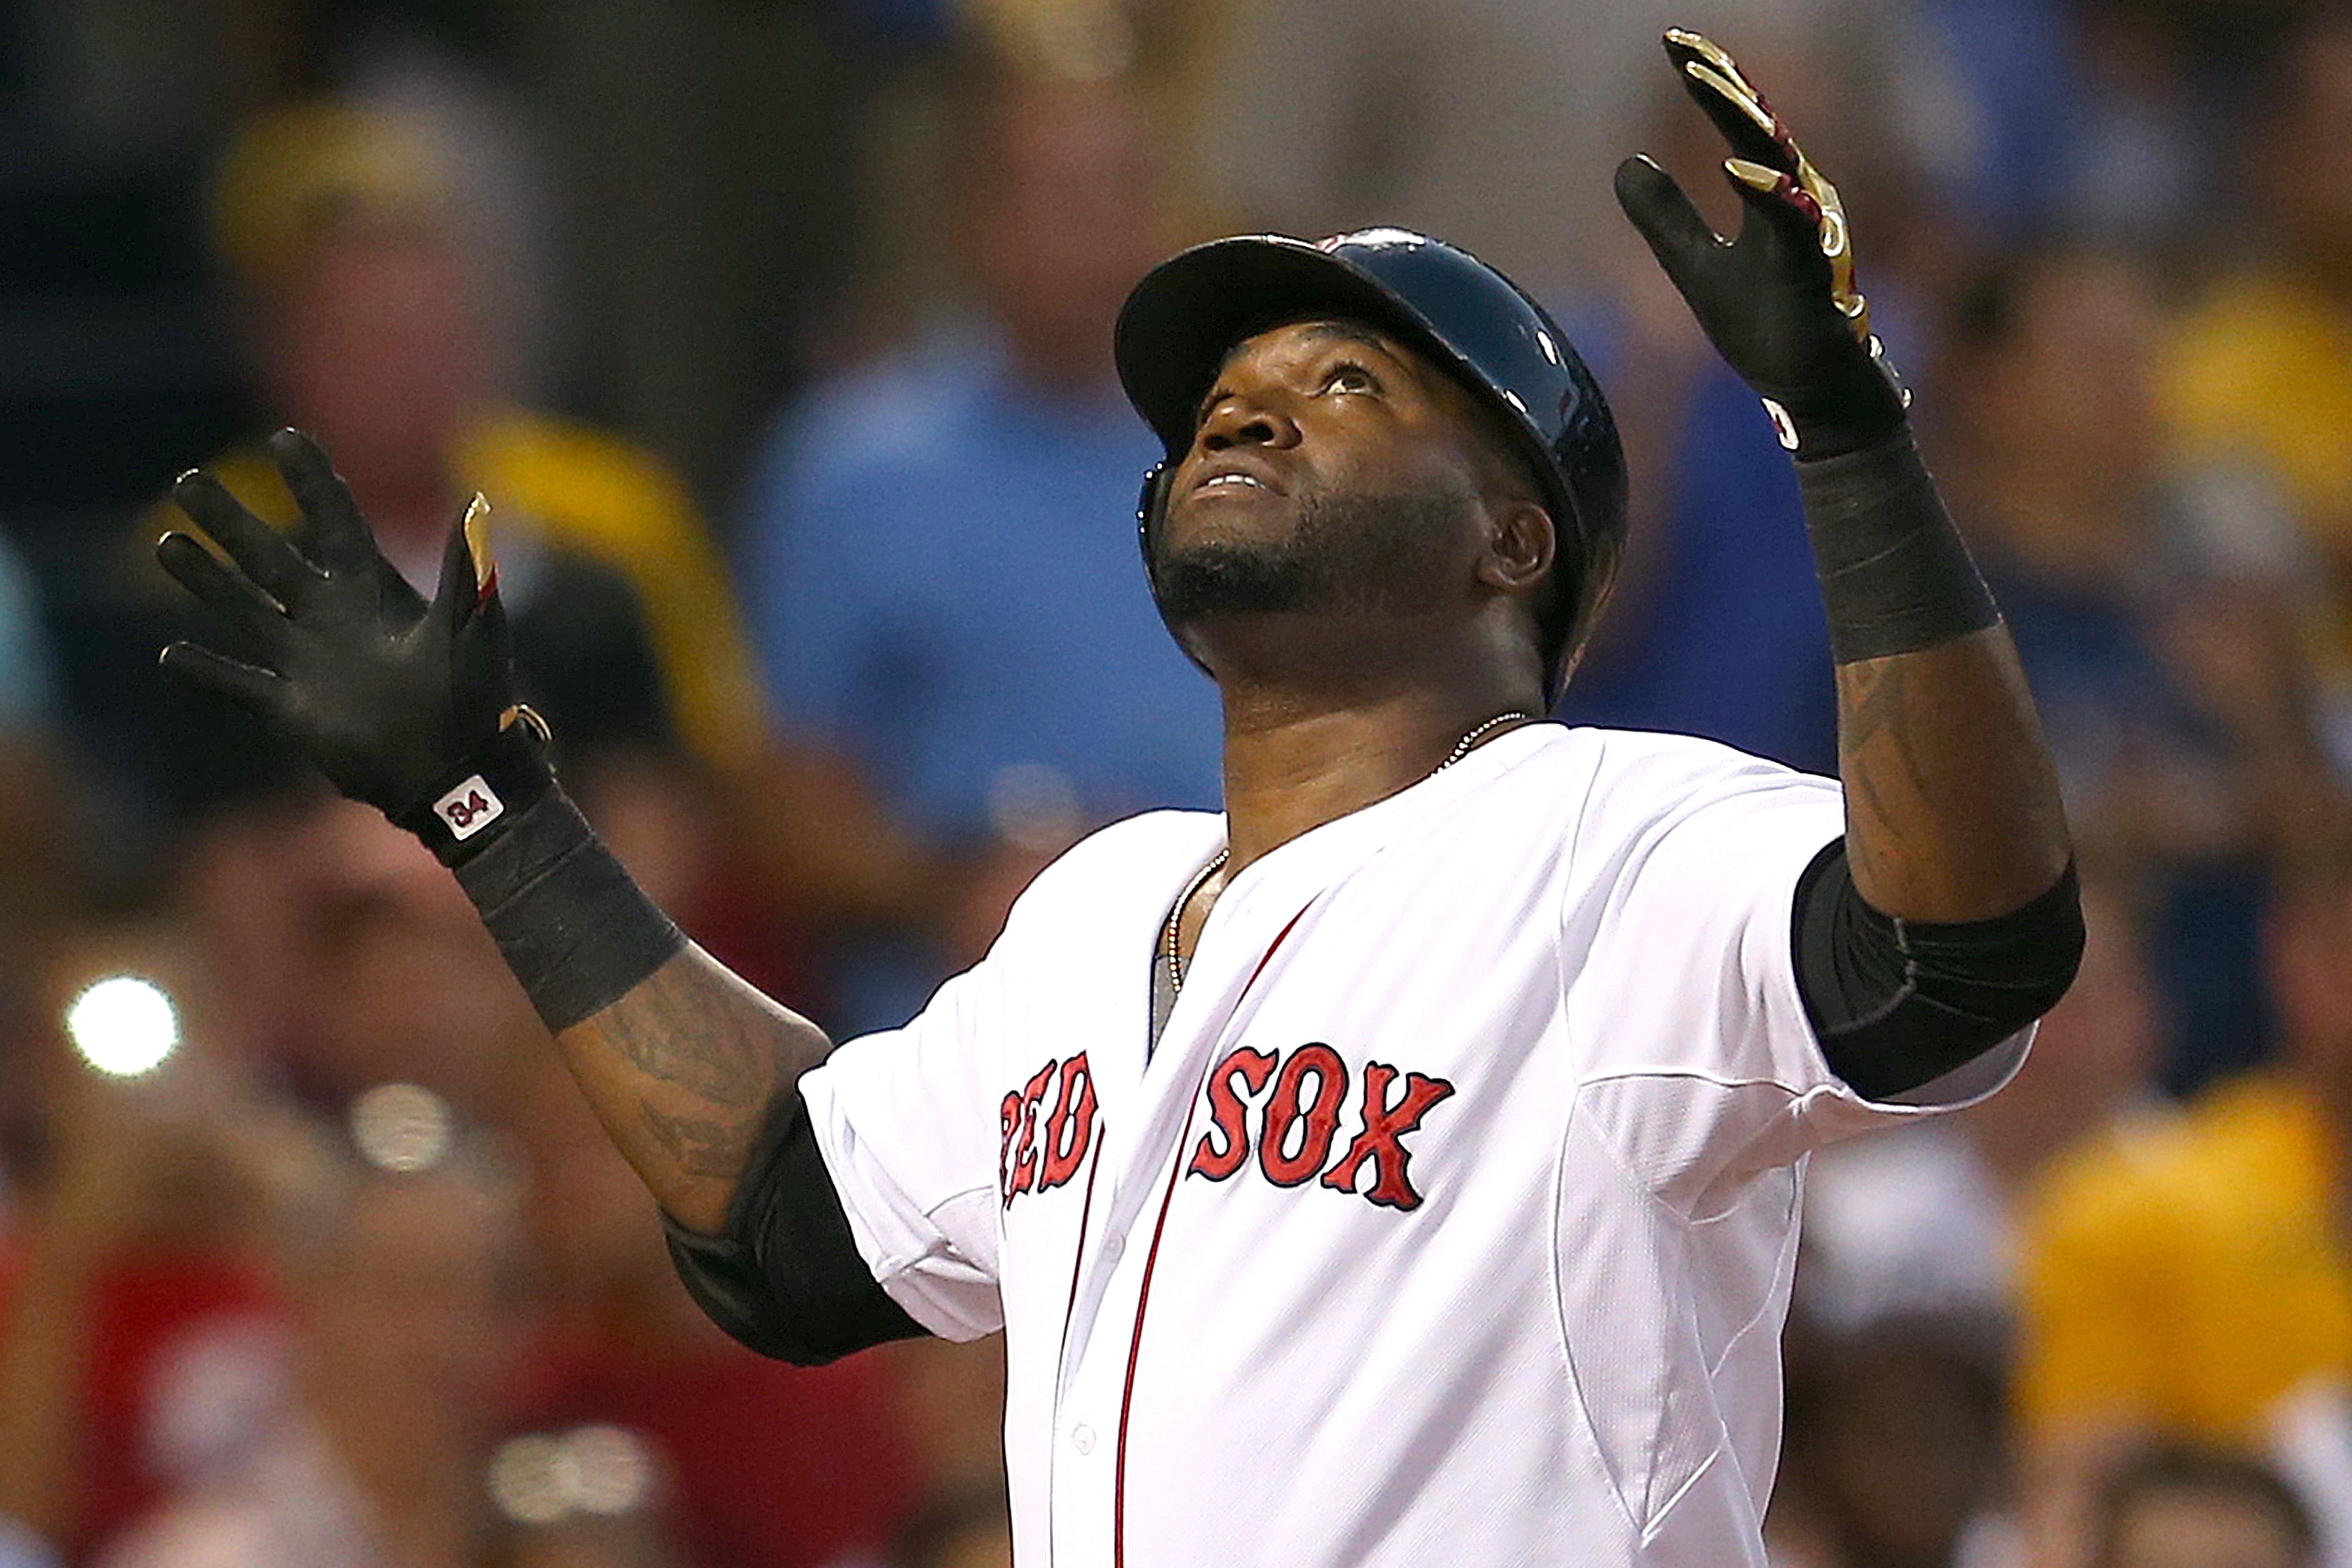 David Ortiz does not belong in the Hall of Fame - The Washington Post